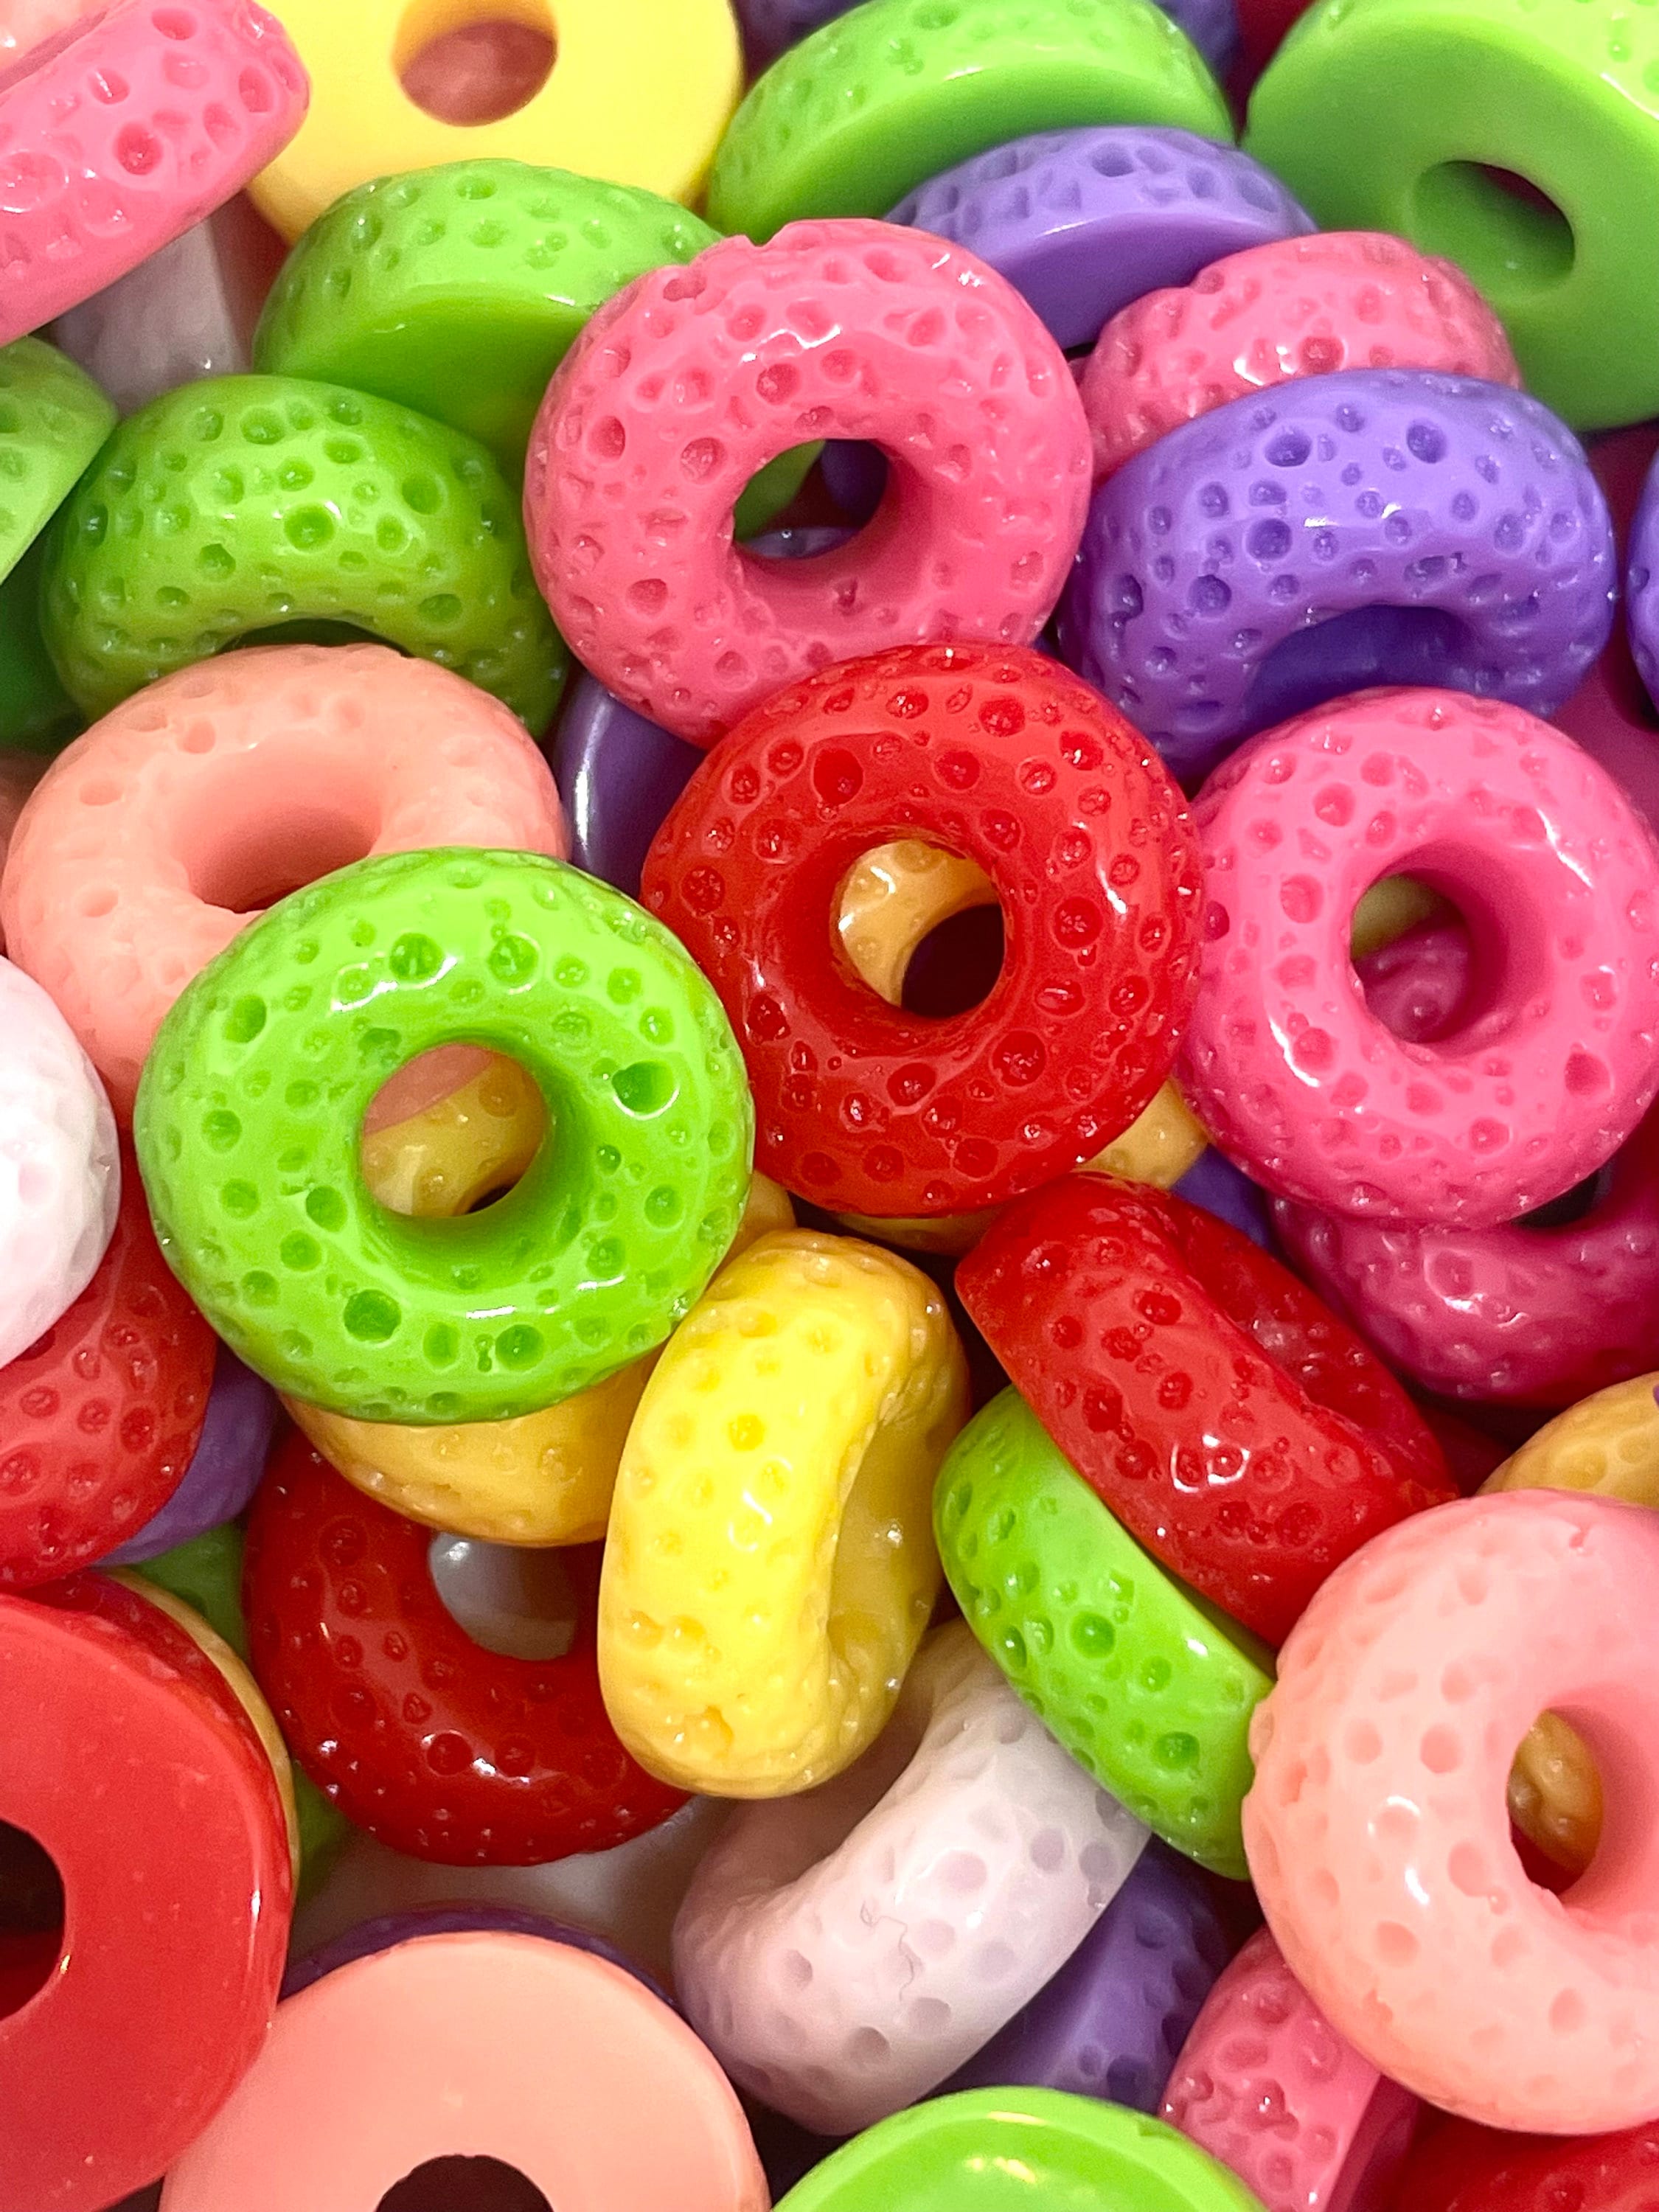 Kawaii Fruit Loop Themed Cereal Cabochons, Slime Toppings, Fillers, Mixers, Fake Food, Candy